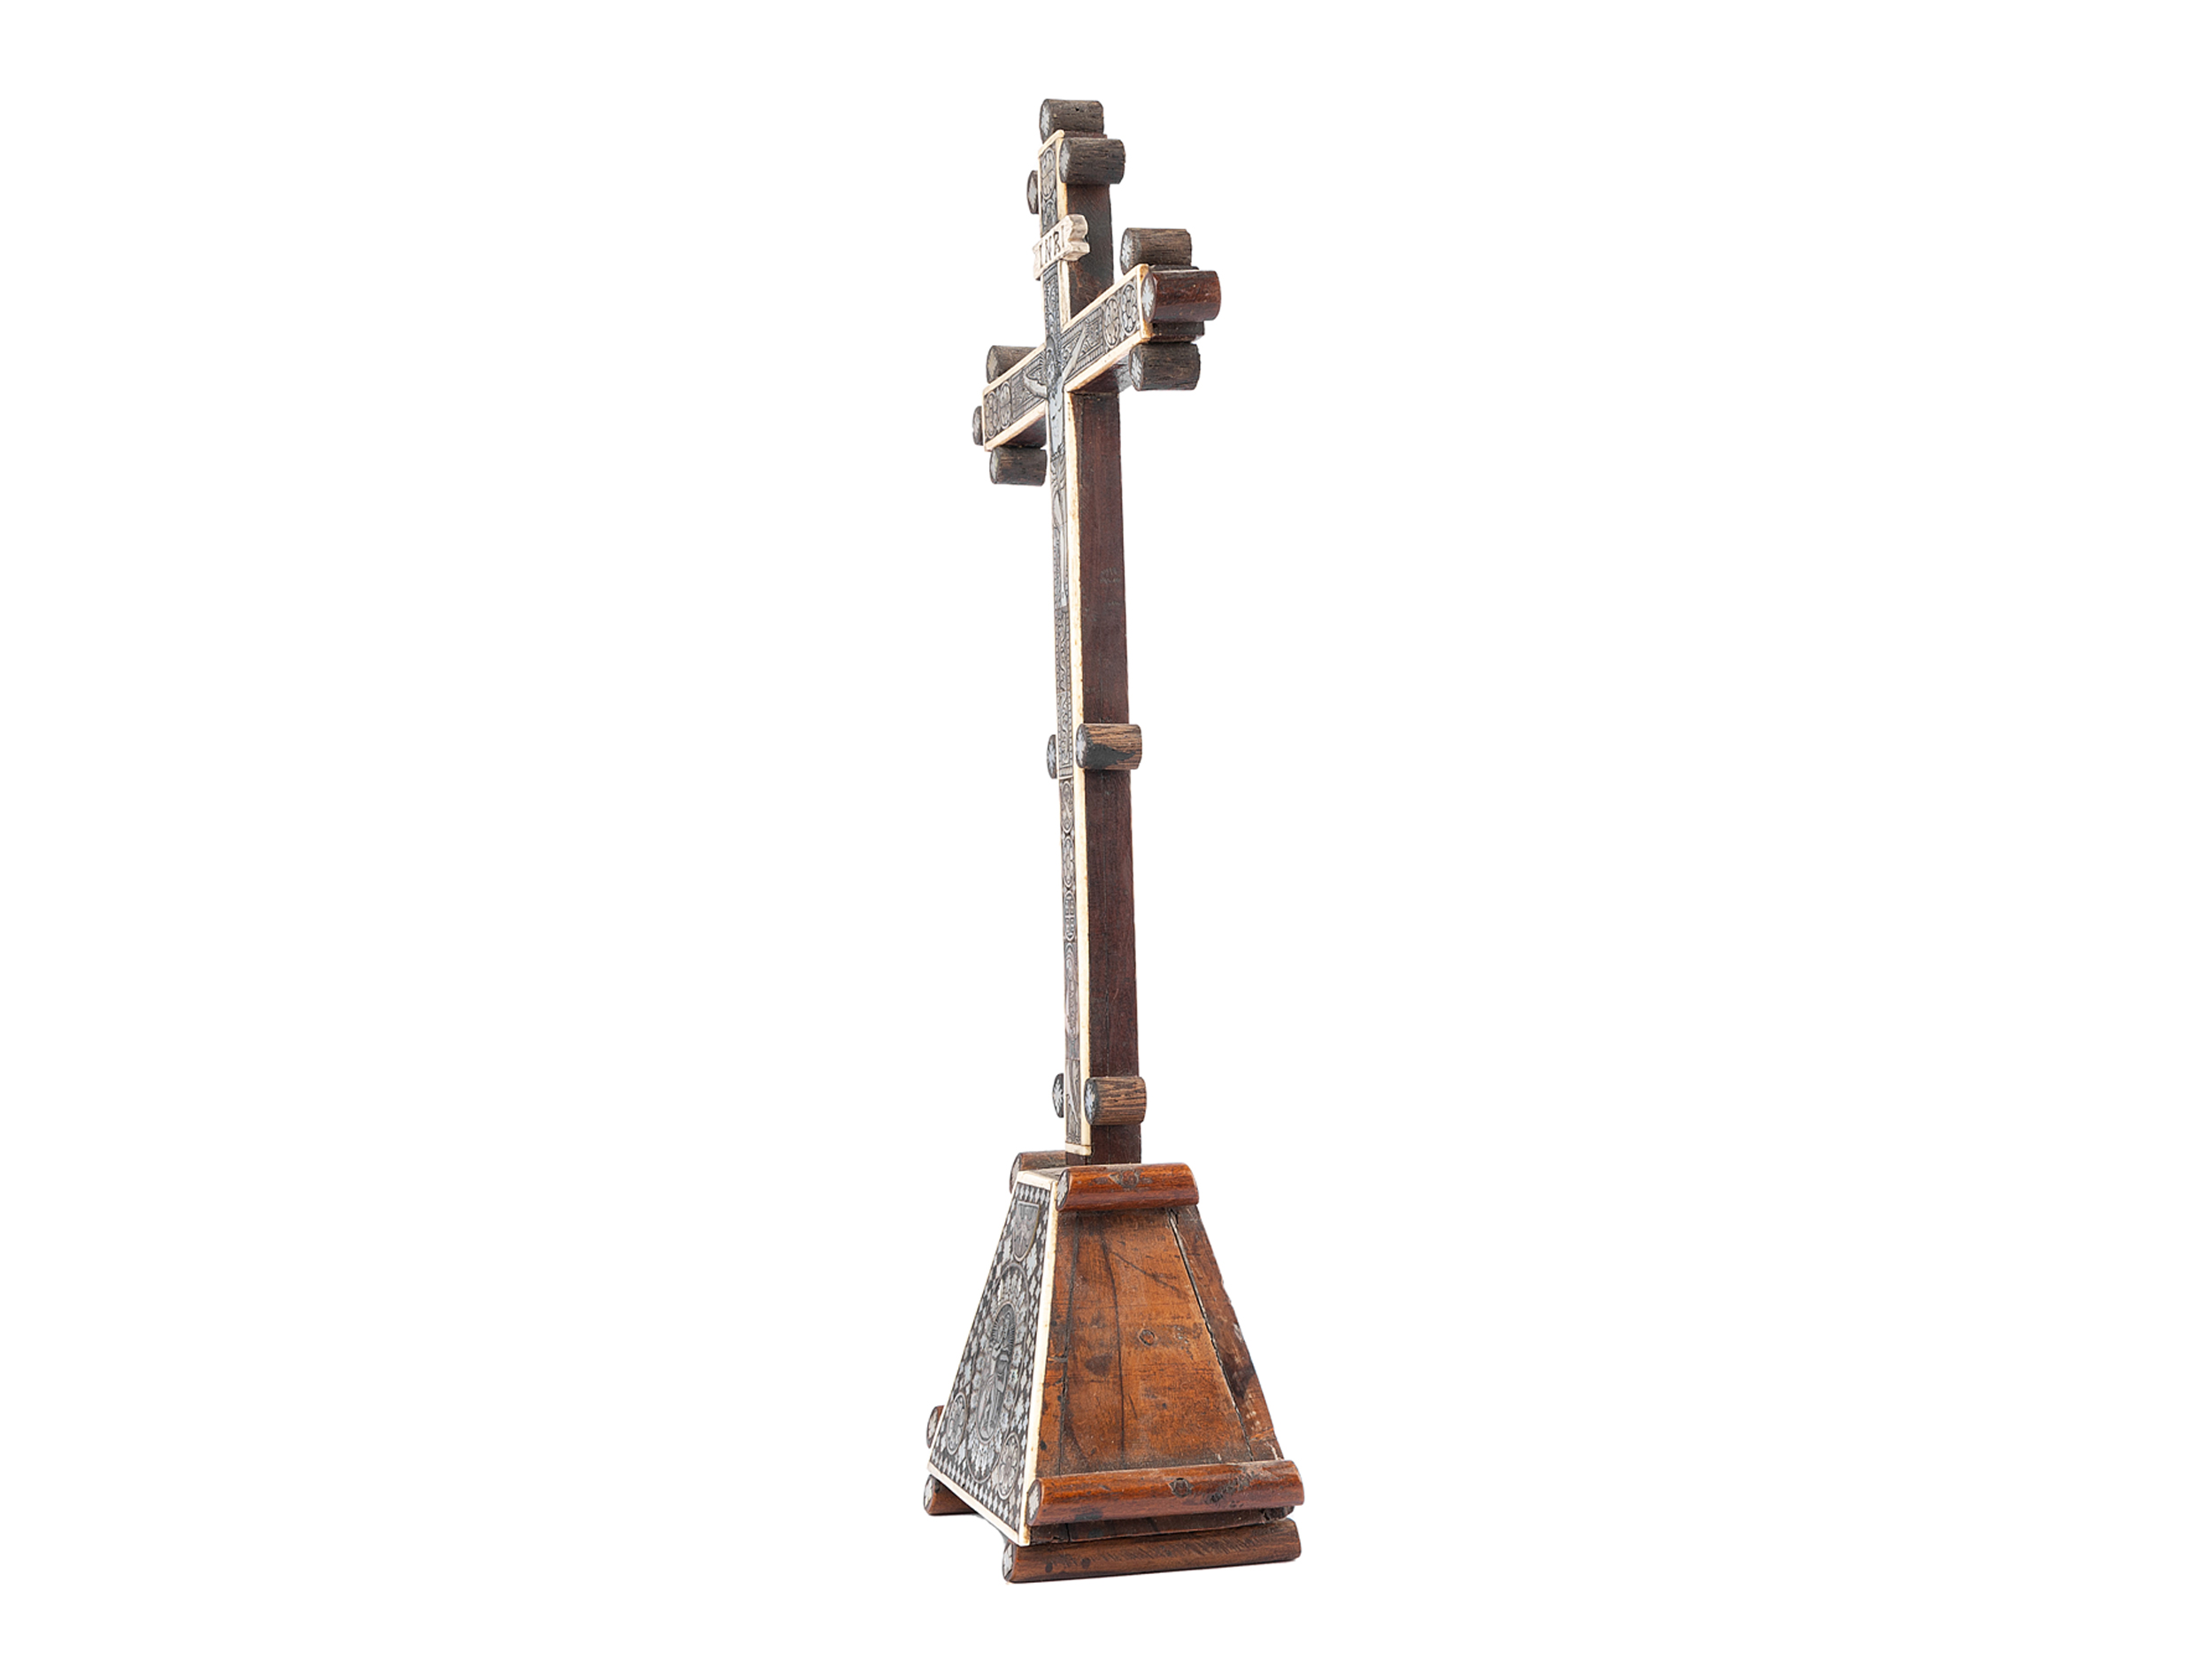 Standing cross, Walnut inlaid with mother-of-pearl & organic material - Image 3 of 5